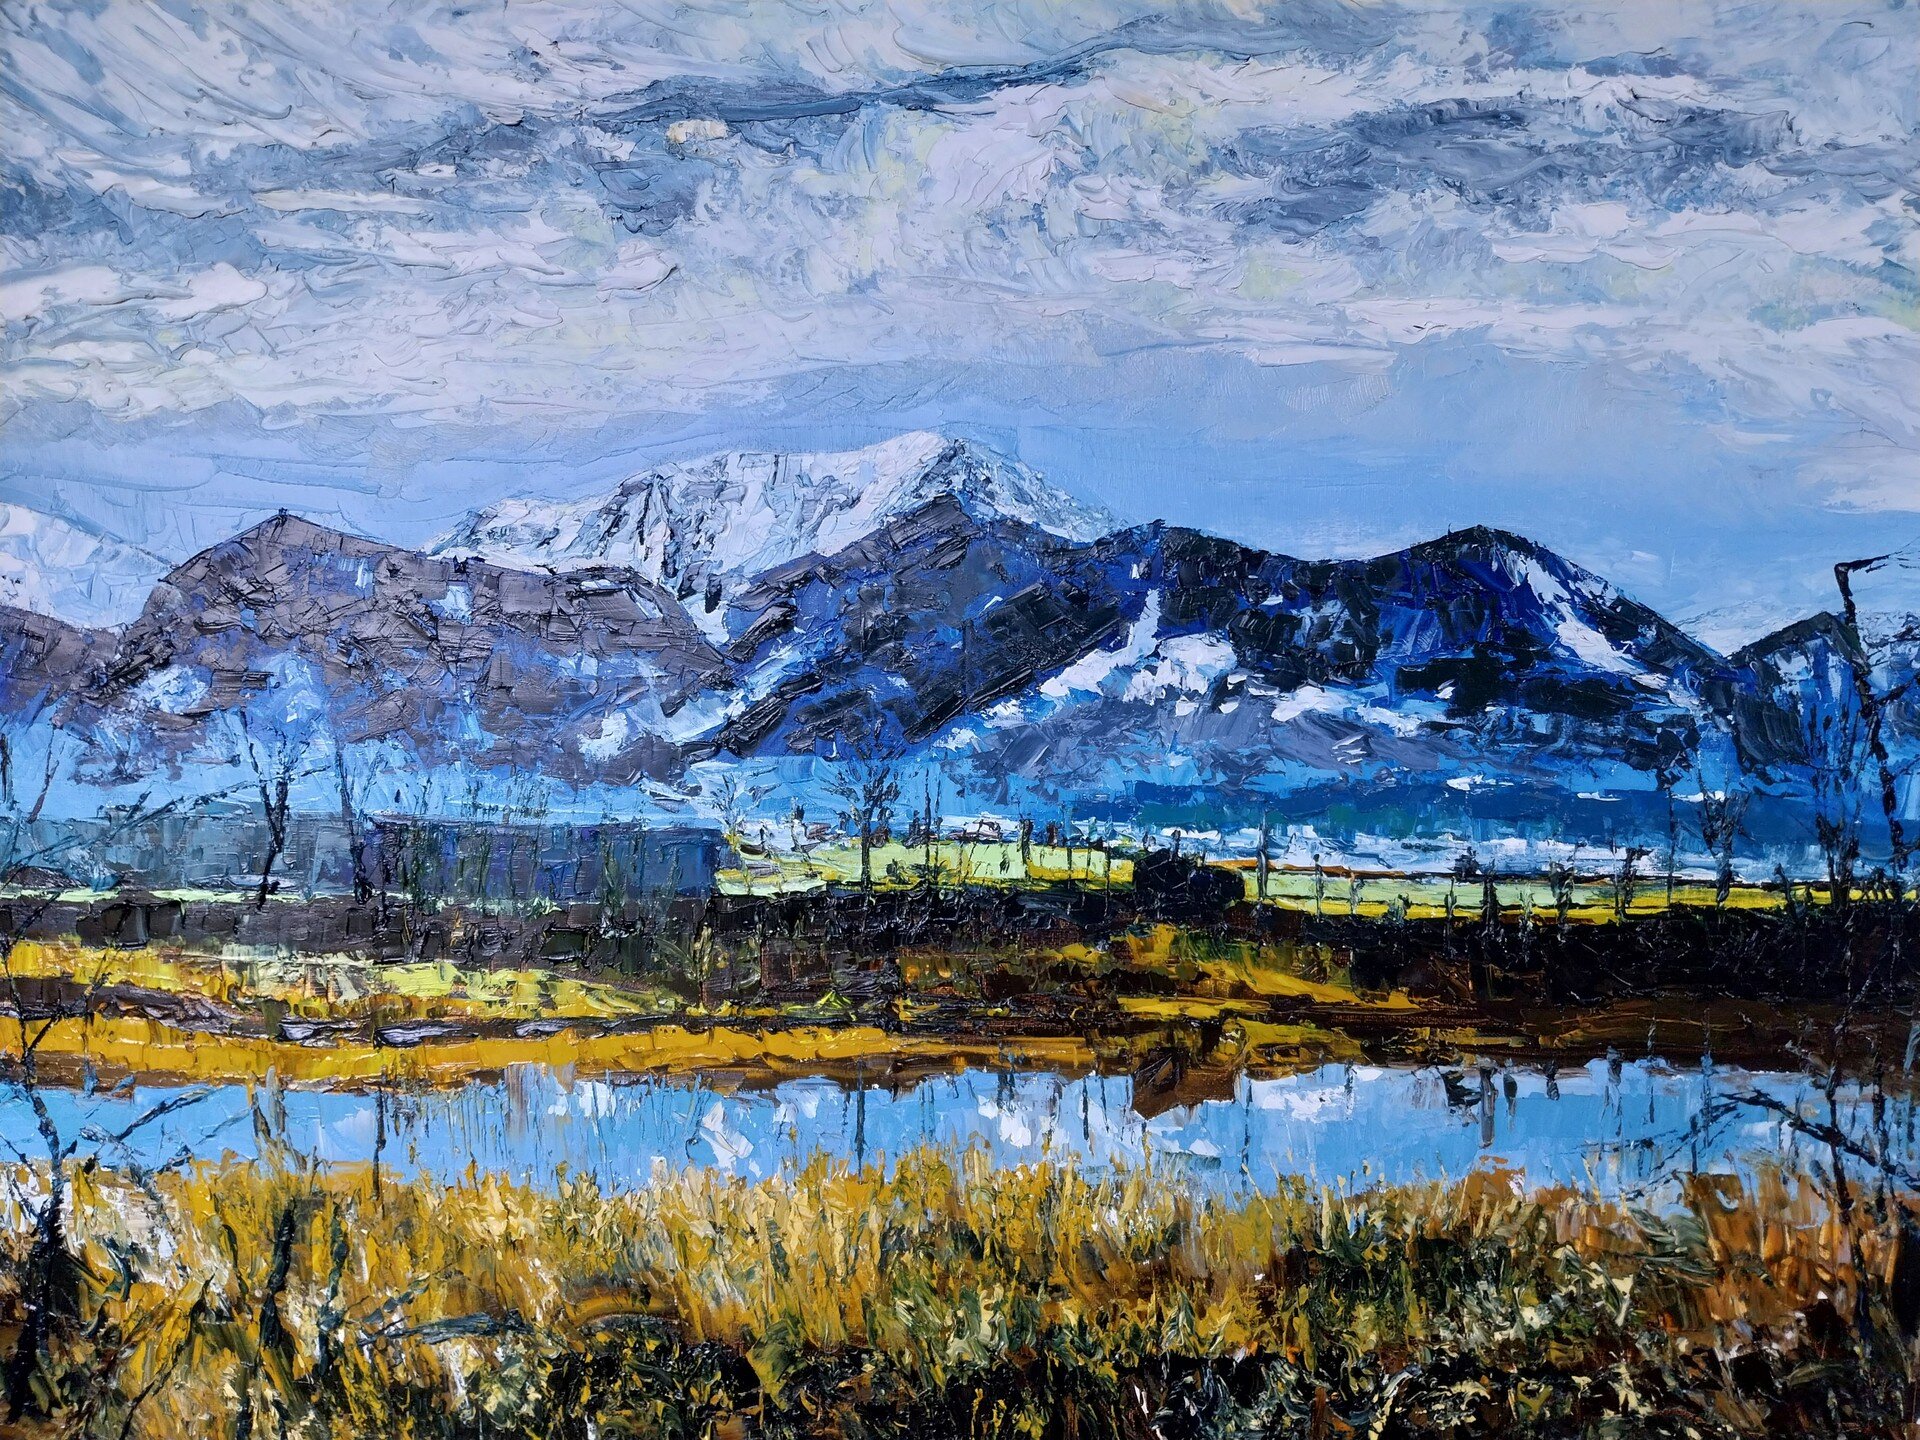 &quot;The View from the Cabin&quot;, oil on canvas 80cm x 60cm by Andy Redwood